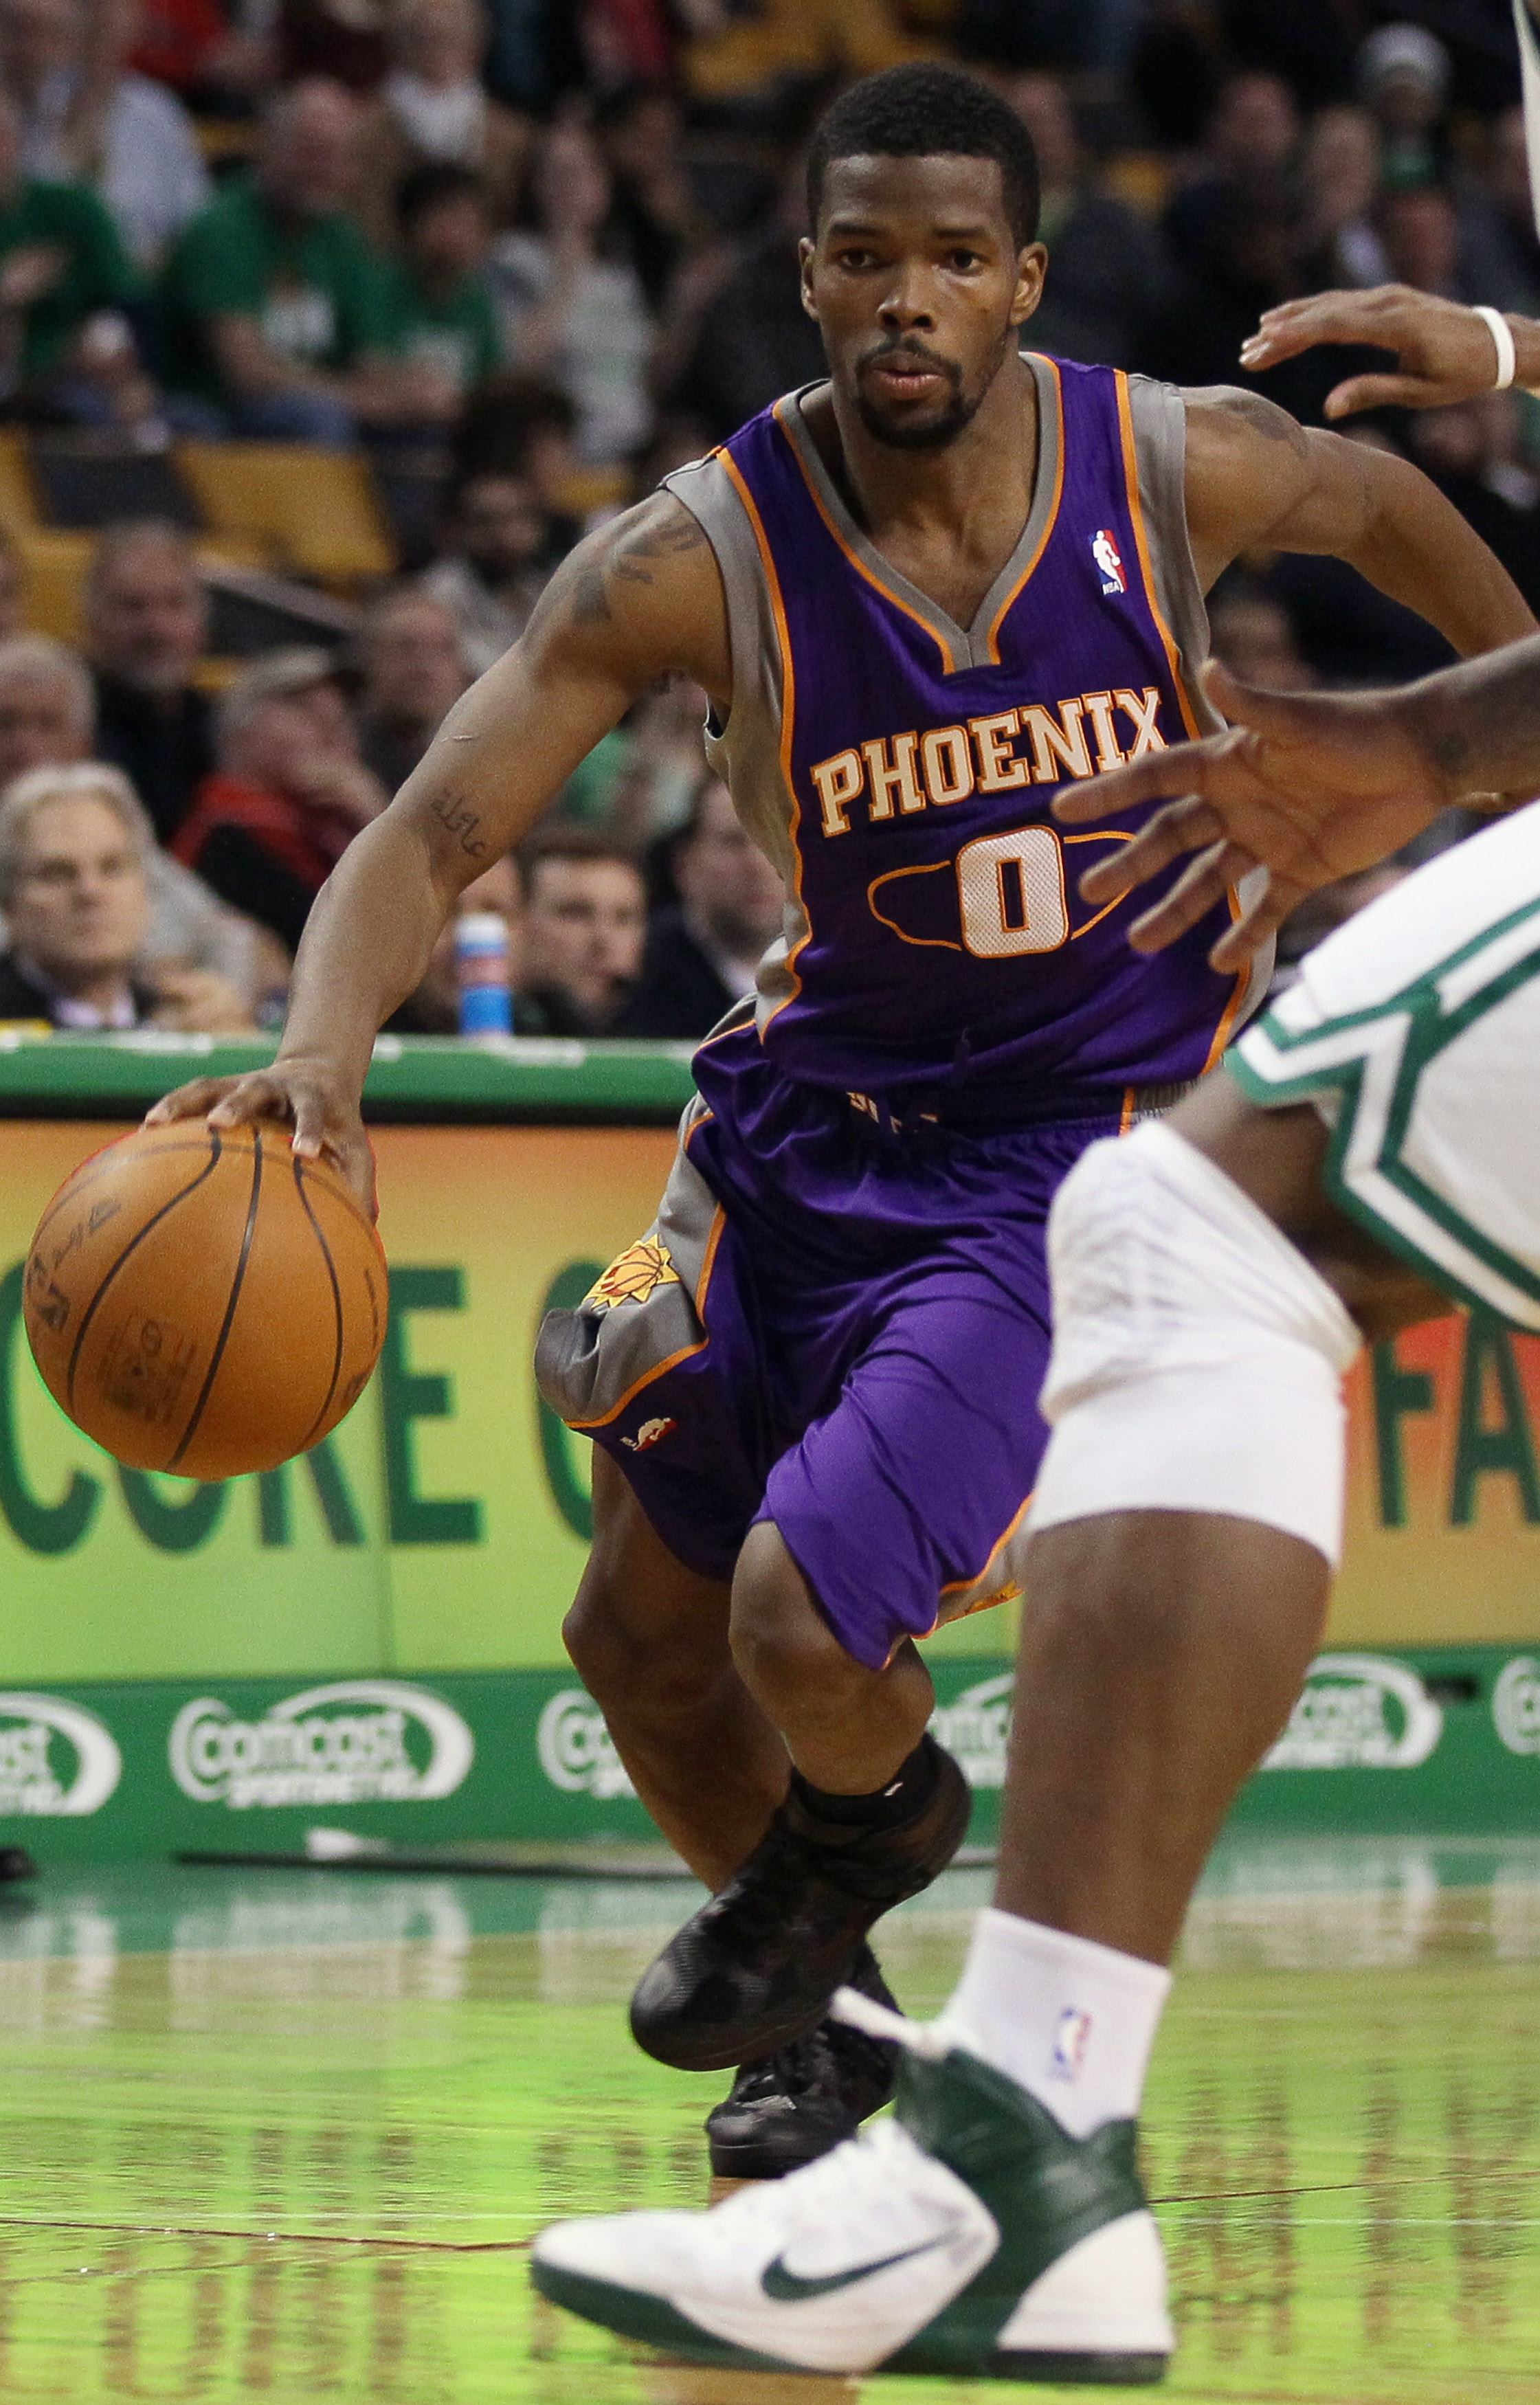 BOSTON, MA - MARCH 02:  Aaron Brooks #0 of the Phoenix Suns heads for the net in the second half against the Boston Celtics on March 2, 2011 at the TD Garden in Boston, Massachusetts.  The Celtics defeated the Suns 115-103. NOTE TO USER: User expressly ac